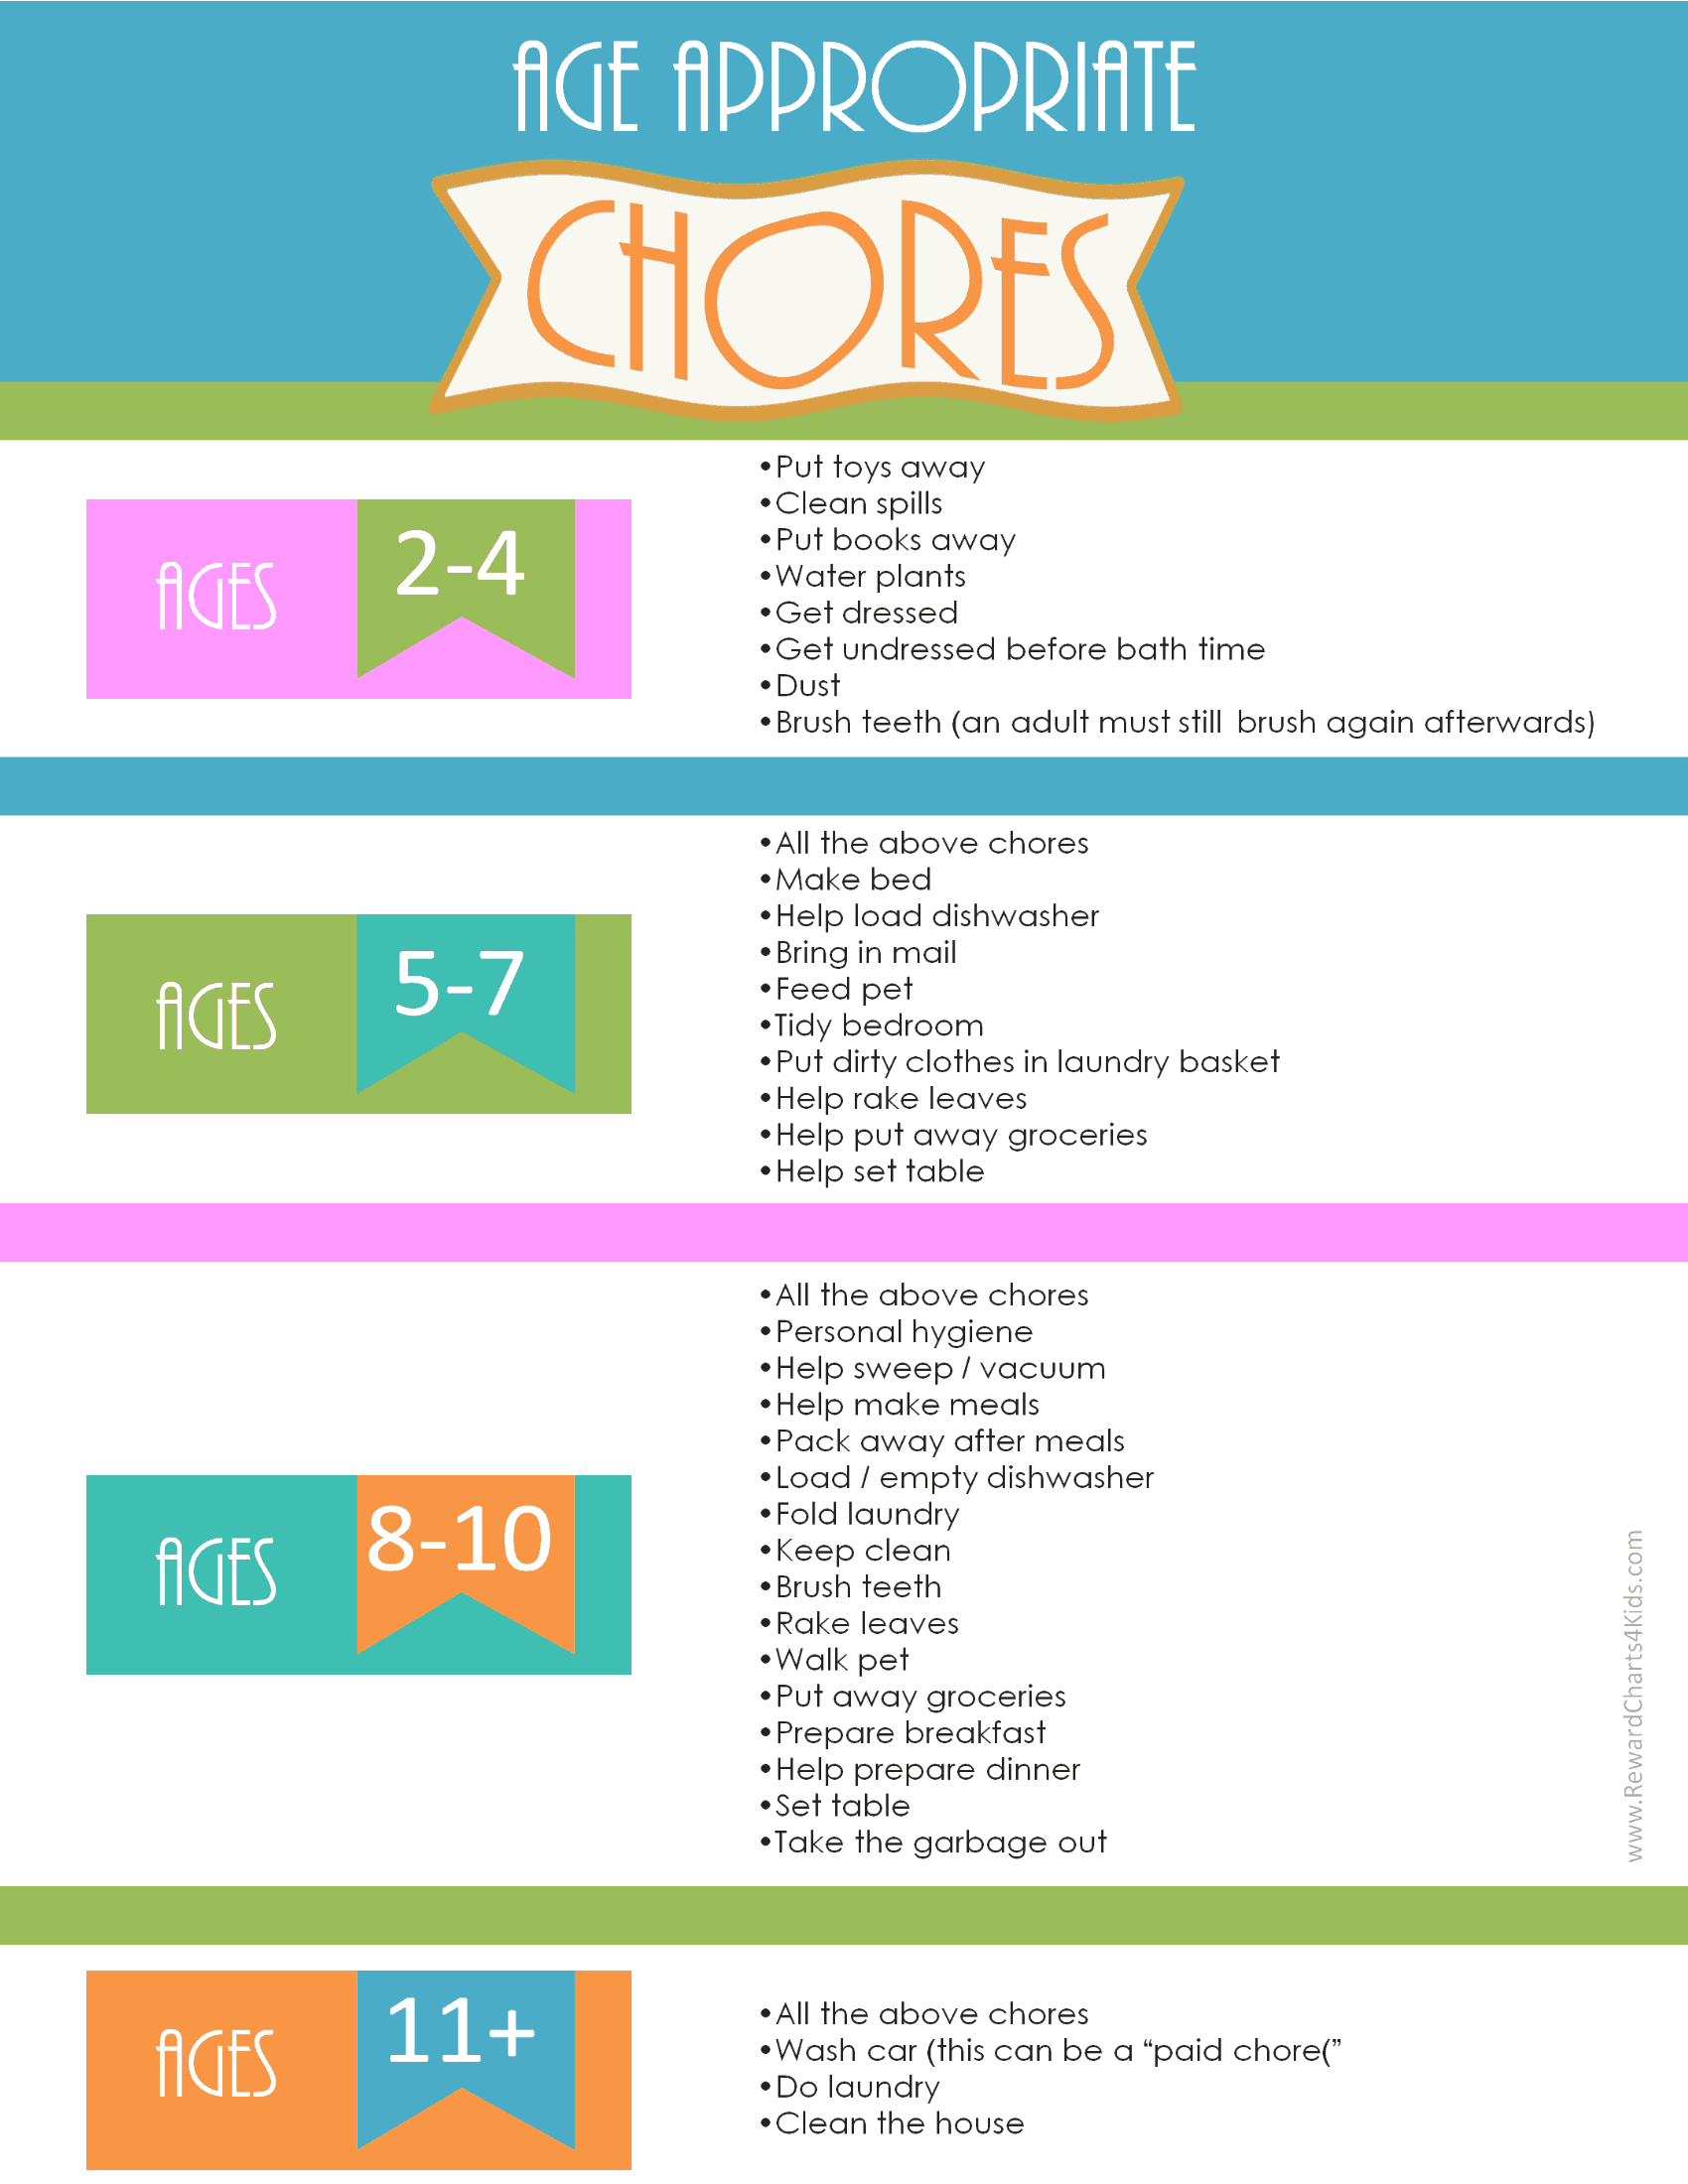 chores-by-age-free-printable